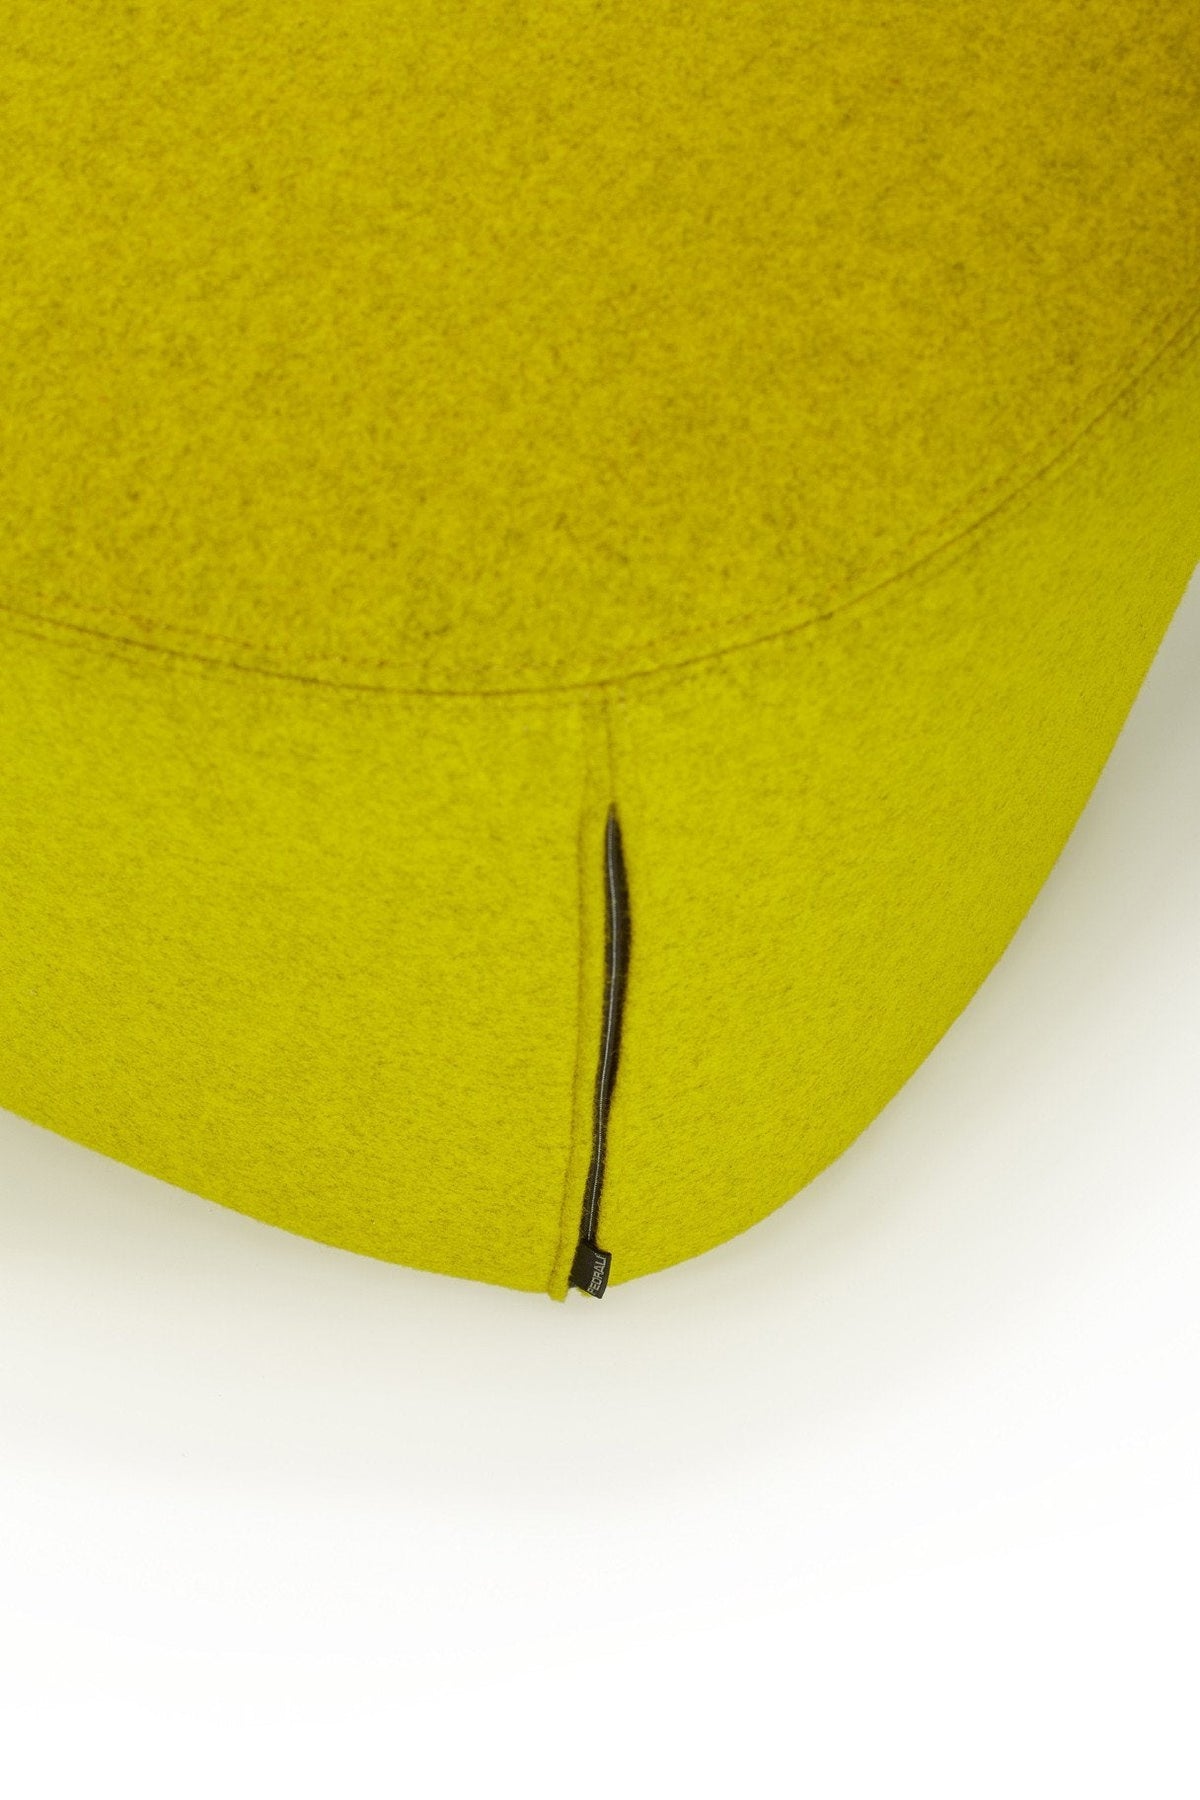 Log Pouf-Pedrali-Contract Furniture Store